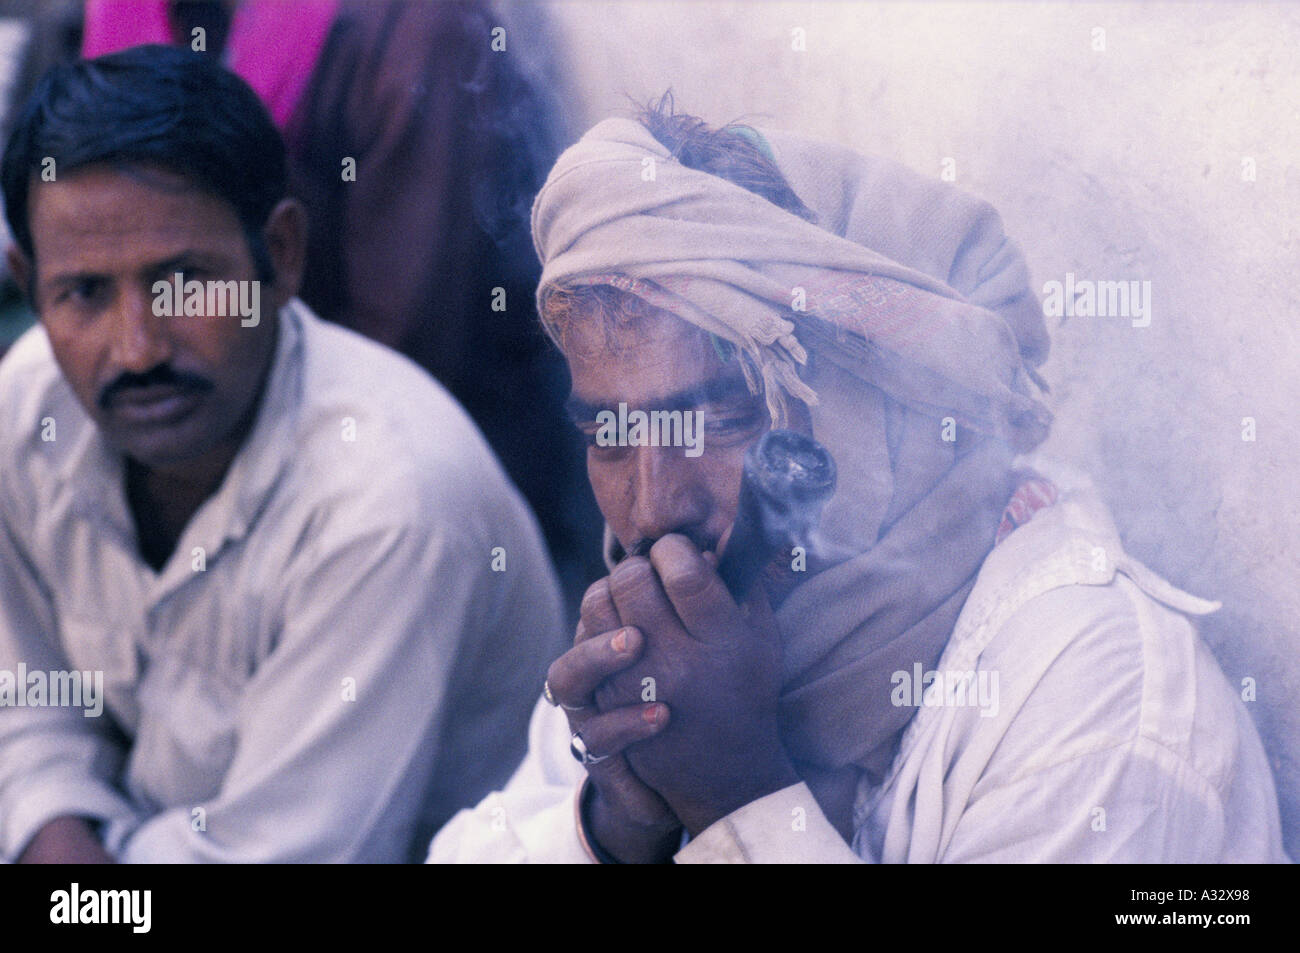 Put that in your pipe and smoke it, man smoking cannabis, Pakistan Stock Photo